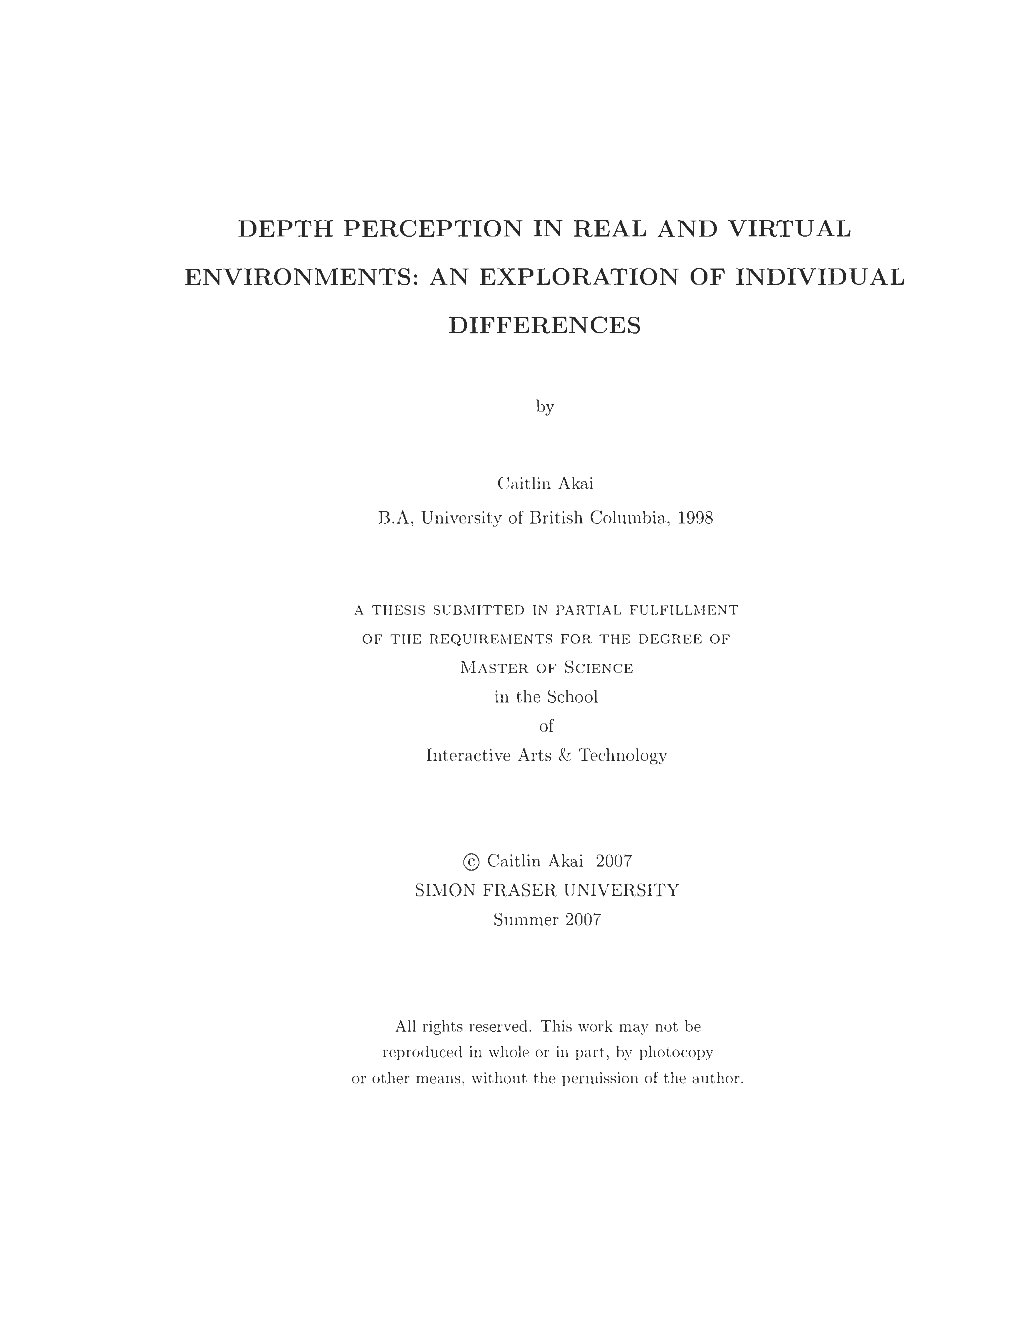 Depth Perception in Real and Virtual Environments: an Exploration of Individual Differences